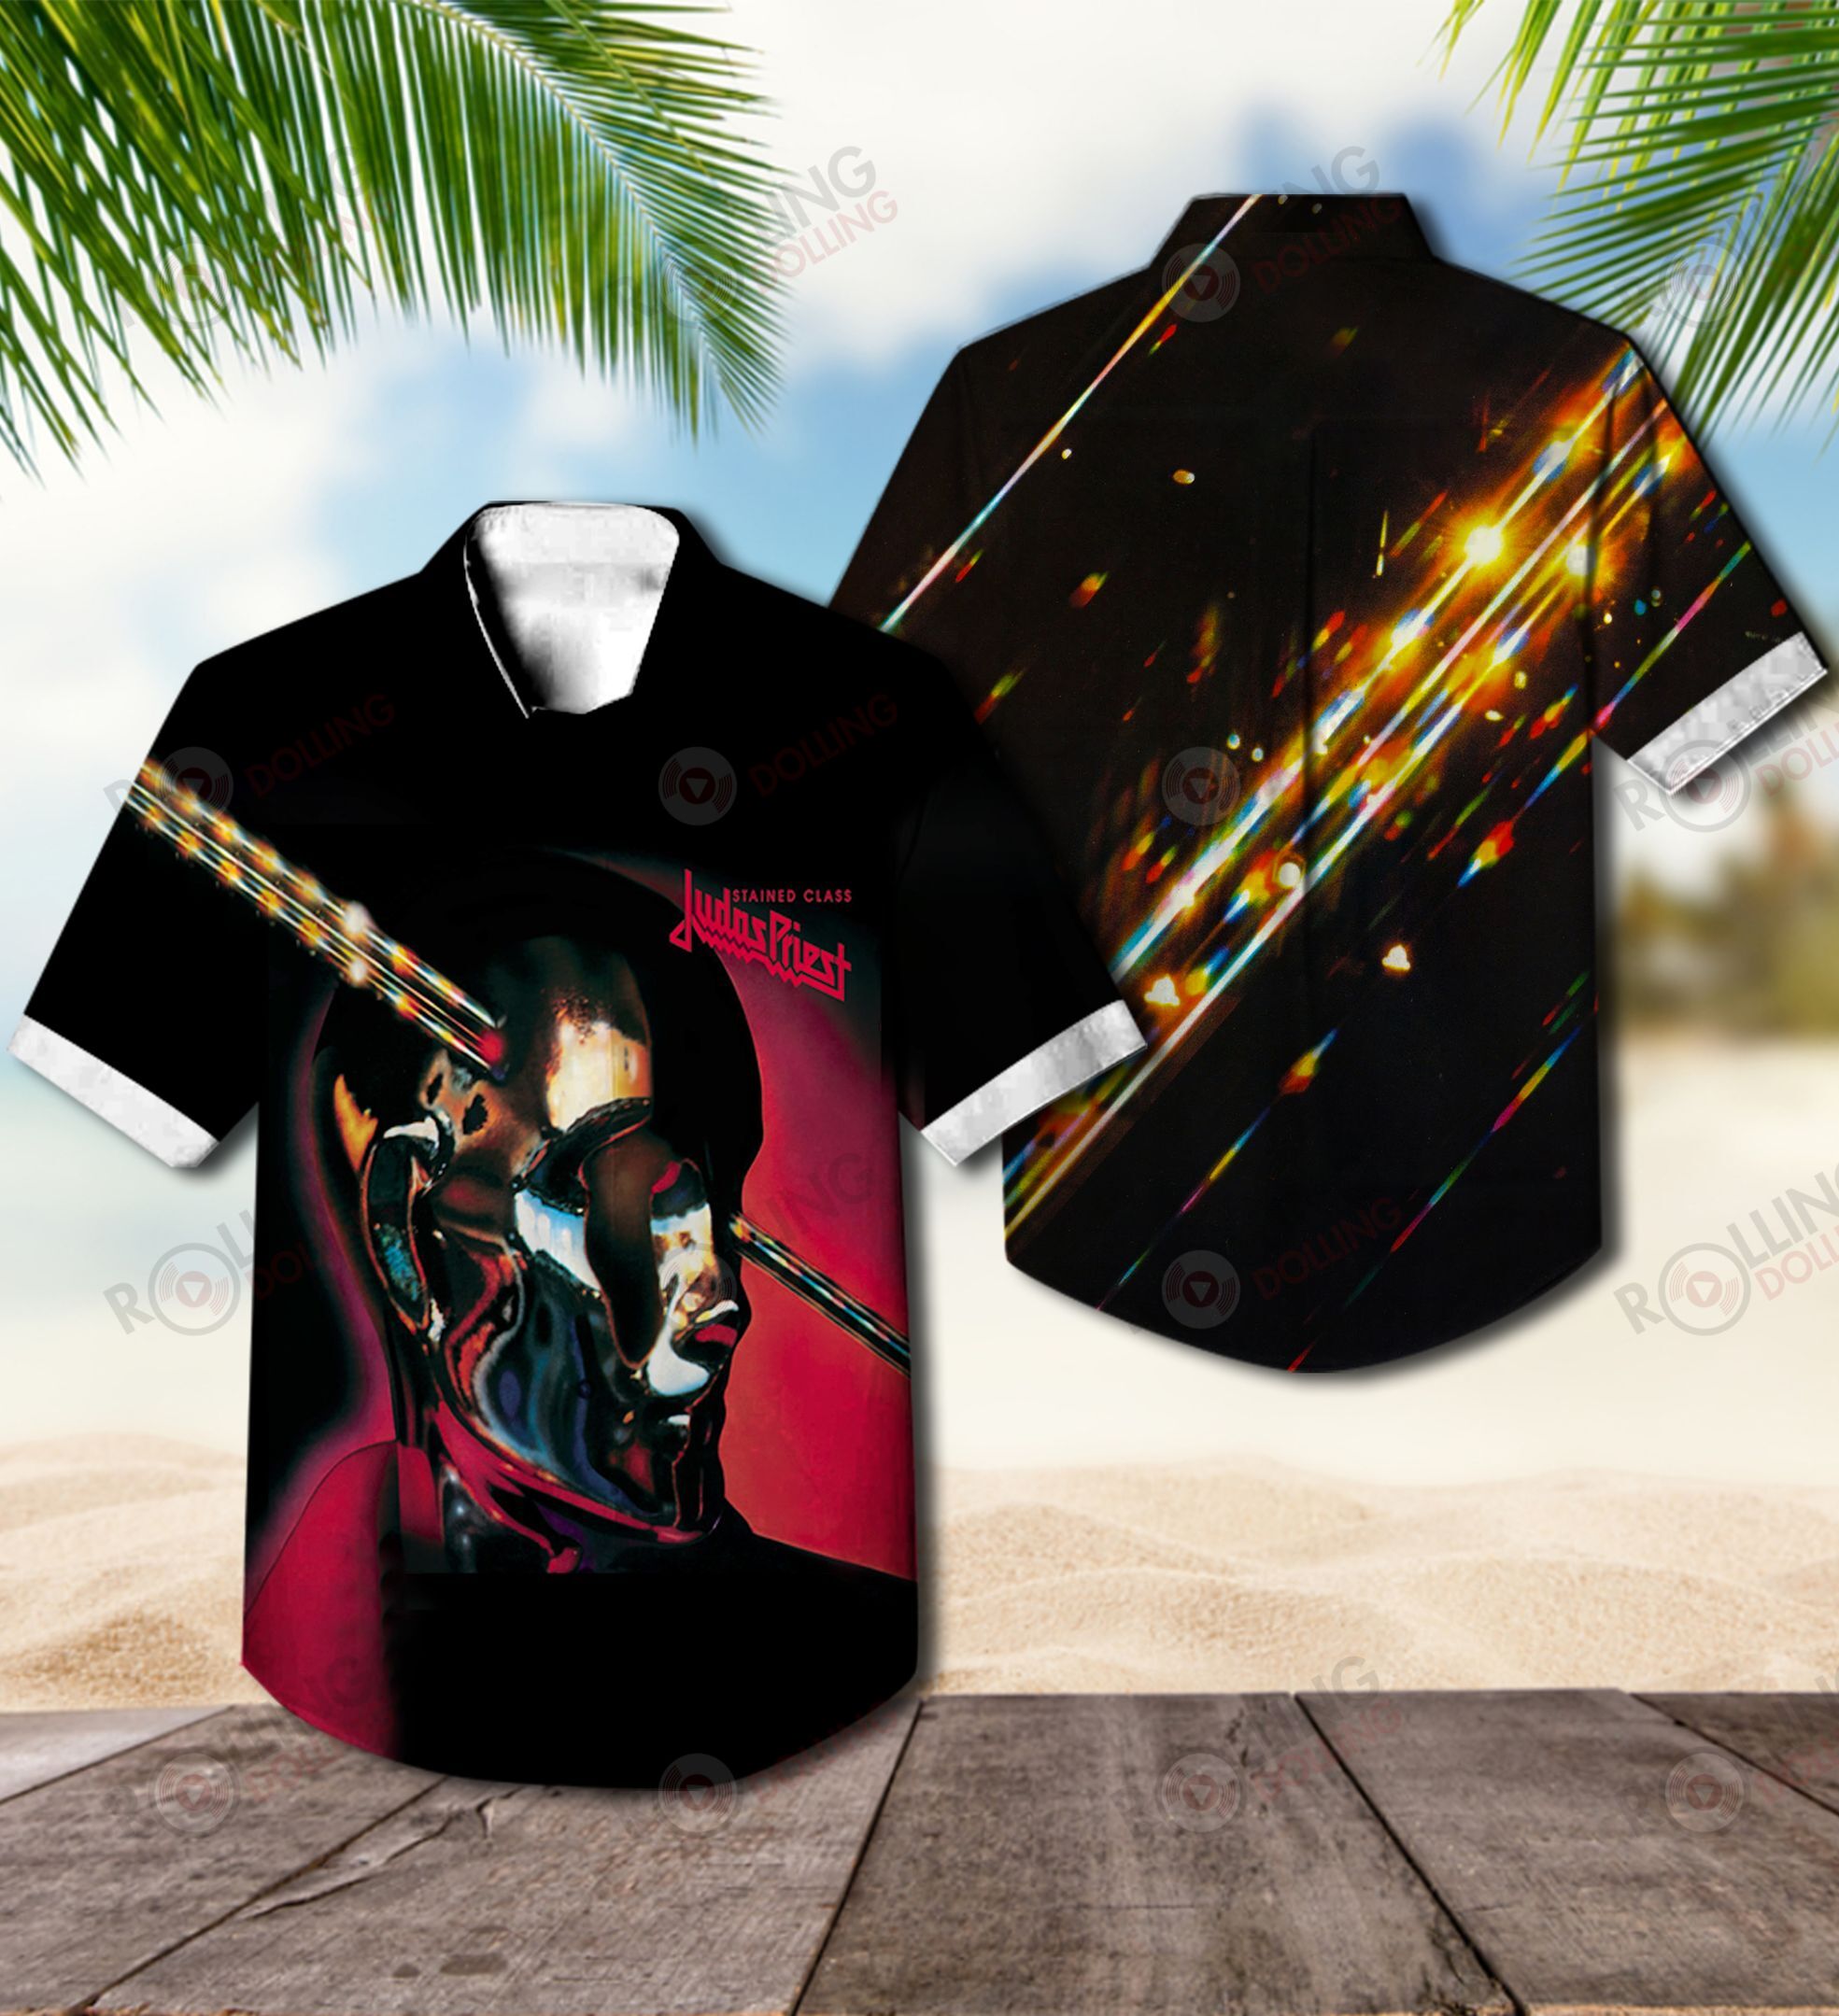 Check out these top 100+ Hawaiian shirt so cool for rock fans 219